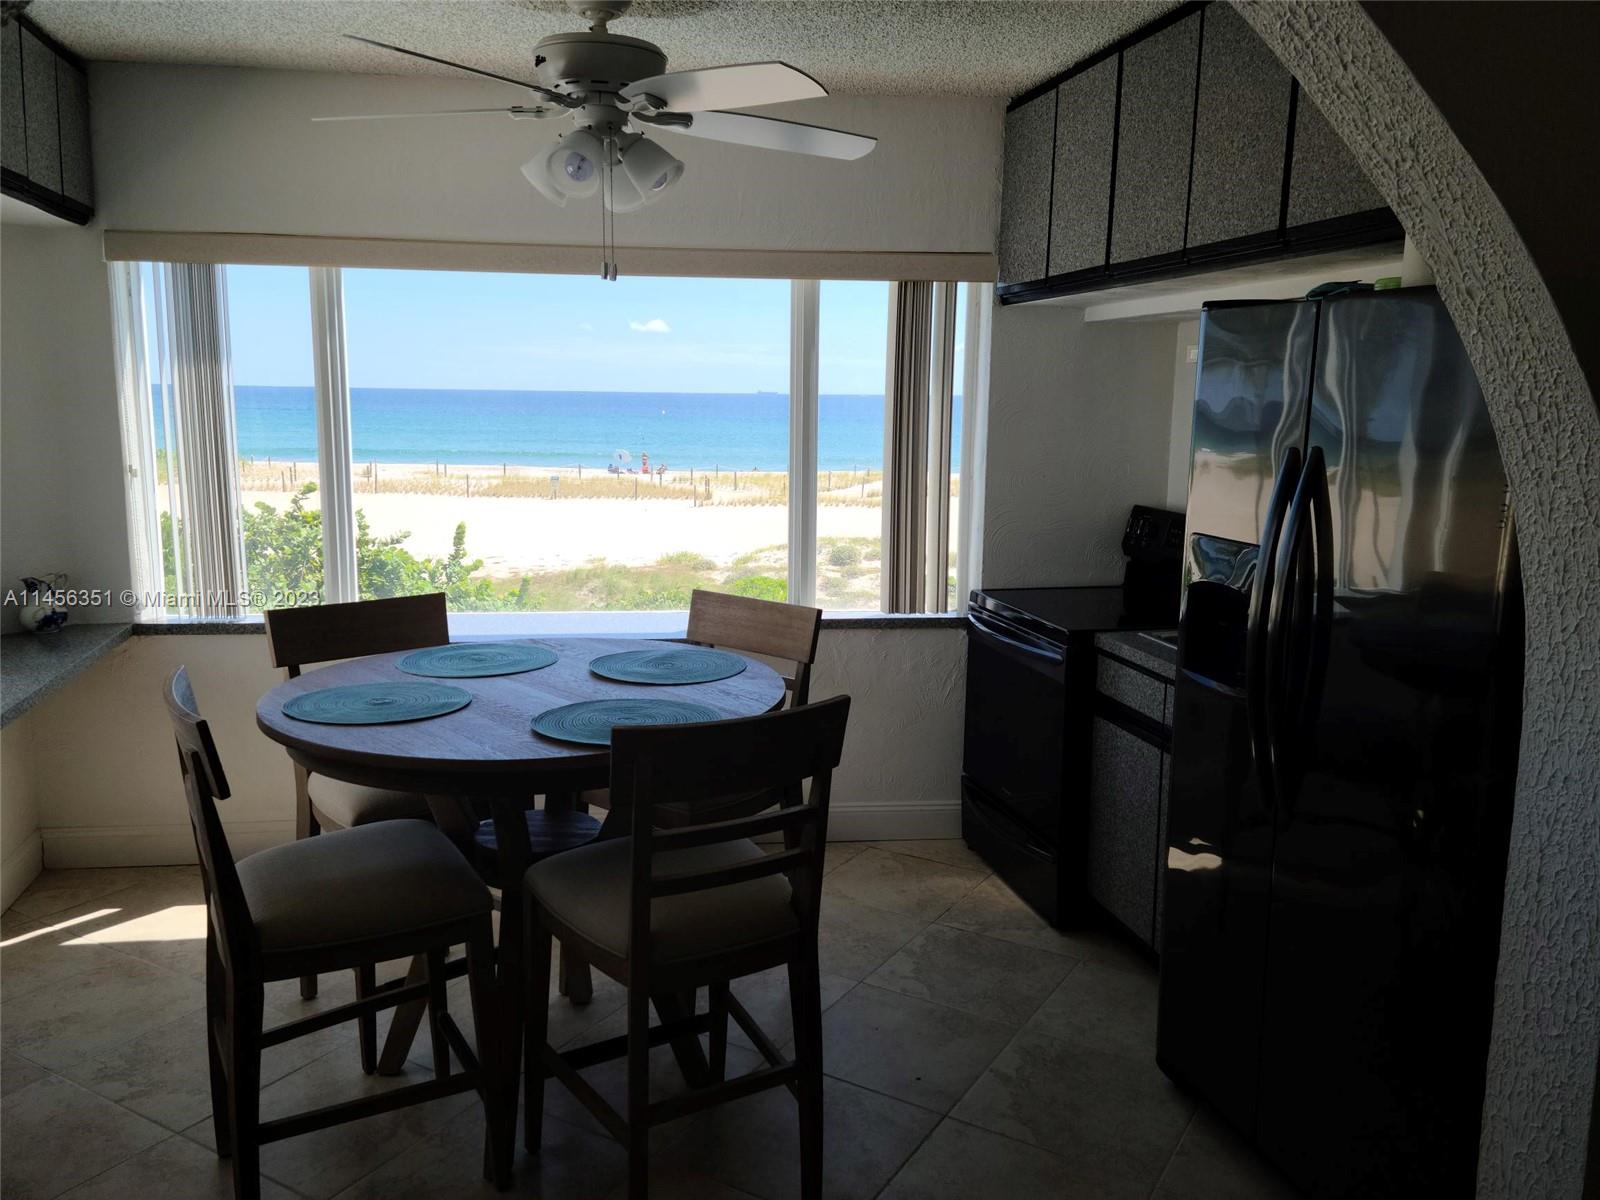 3401 NE 10th St Unit 5, Pompano Beach, Florida, 33062, United States, 1 Bedroom Bedrooms, ,1 BathroomBathrooms,Residential,For Sale,3401 NE 10th St Unit 5,1337555